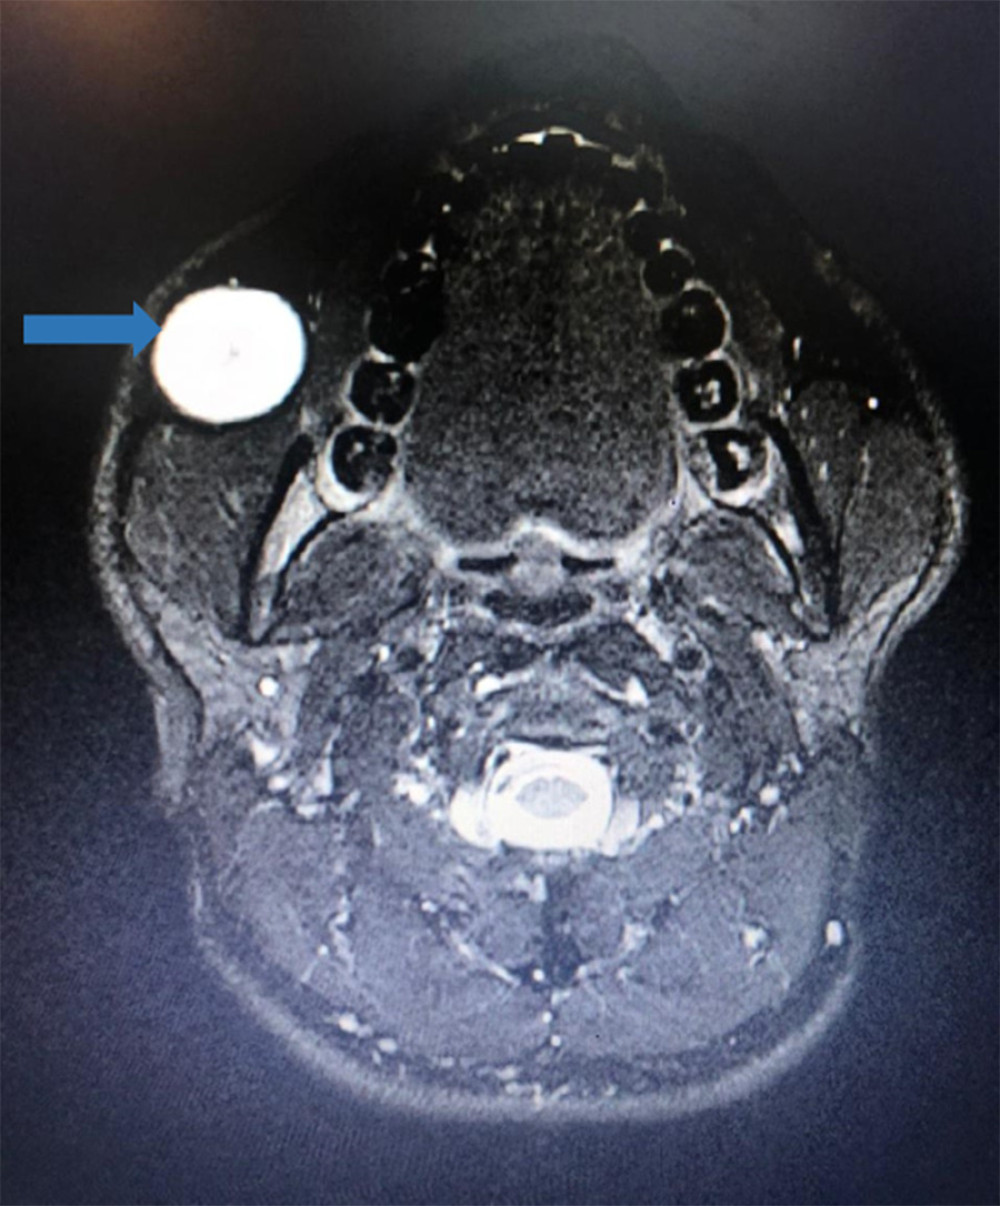 MRI shows a cystic lesion anterior to the right masseter muscle, measuring 28×24×20 mm (arrow). Hypointense in T1 and hyperintense in T2 with internal mini-cystic areas.